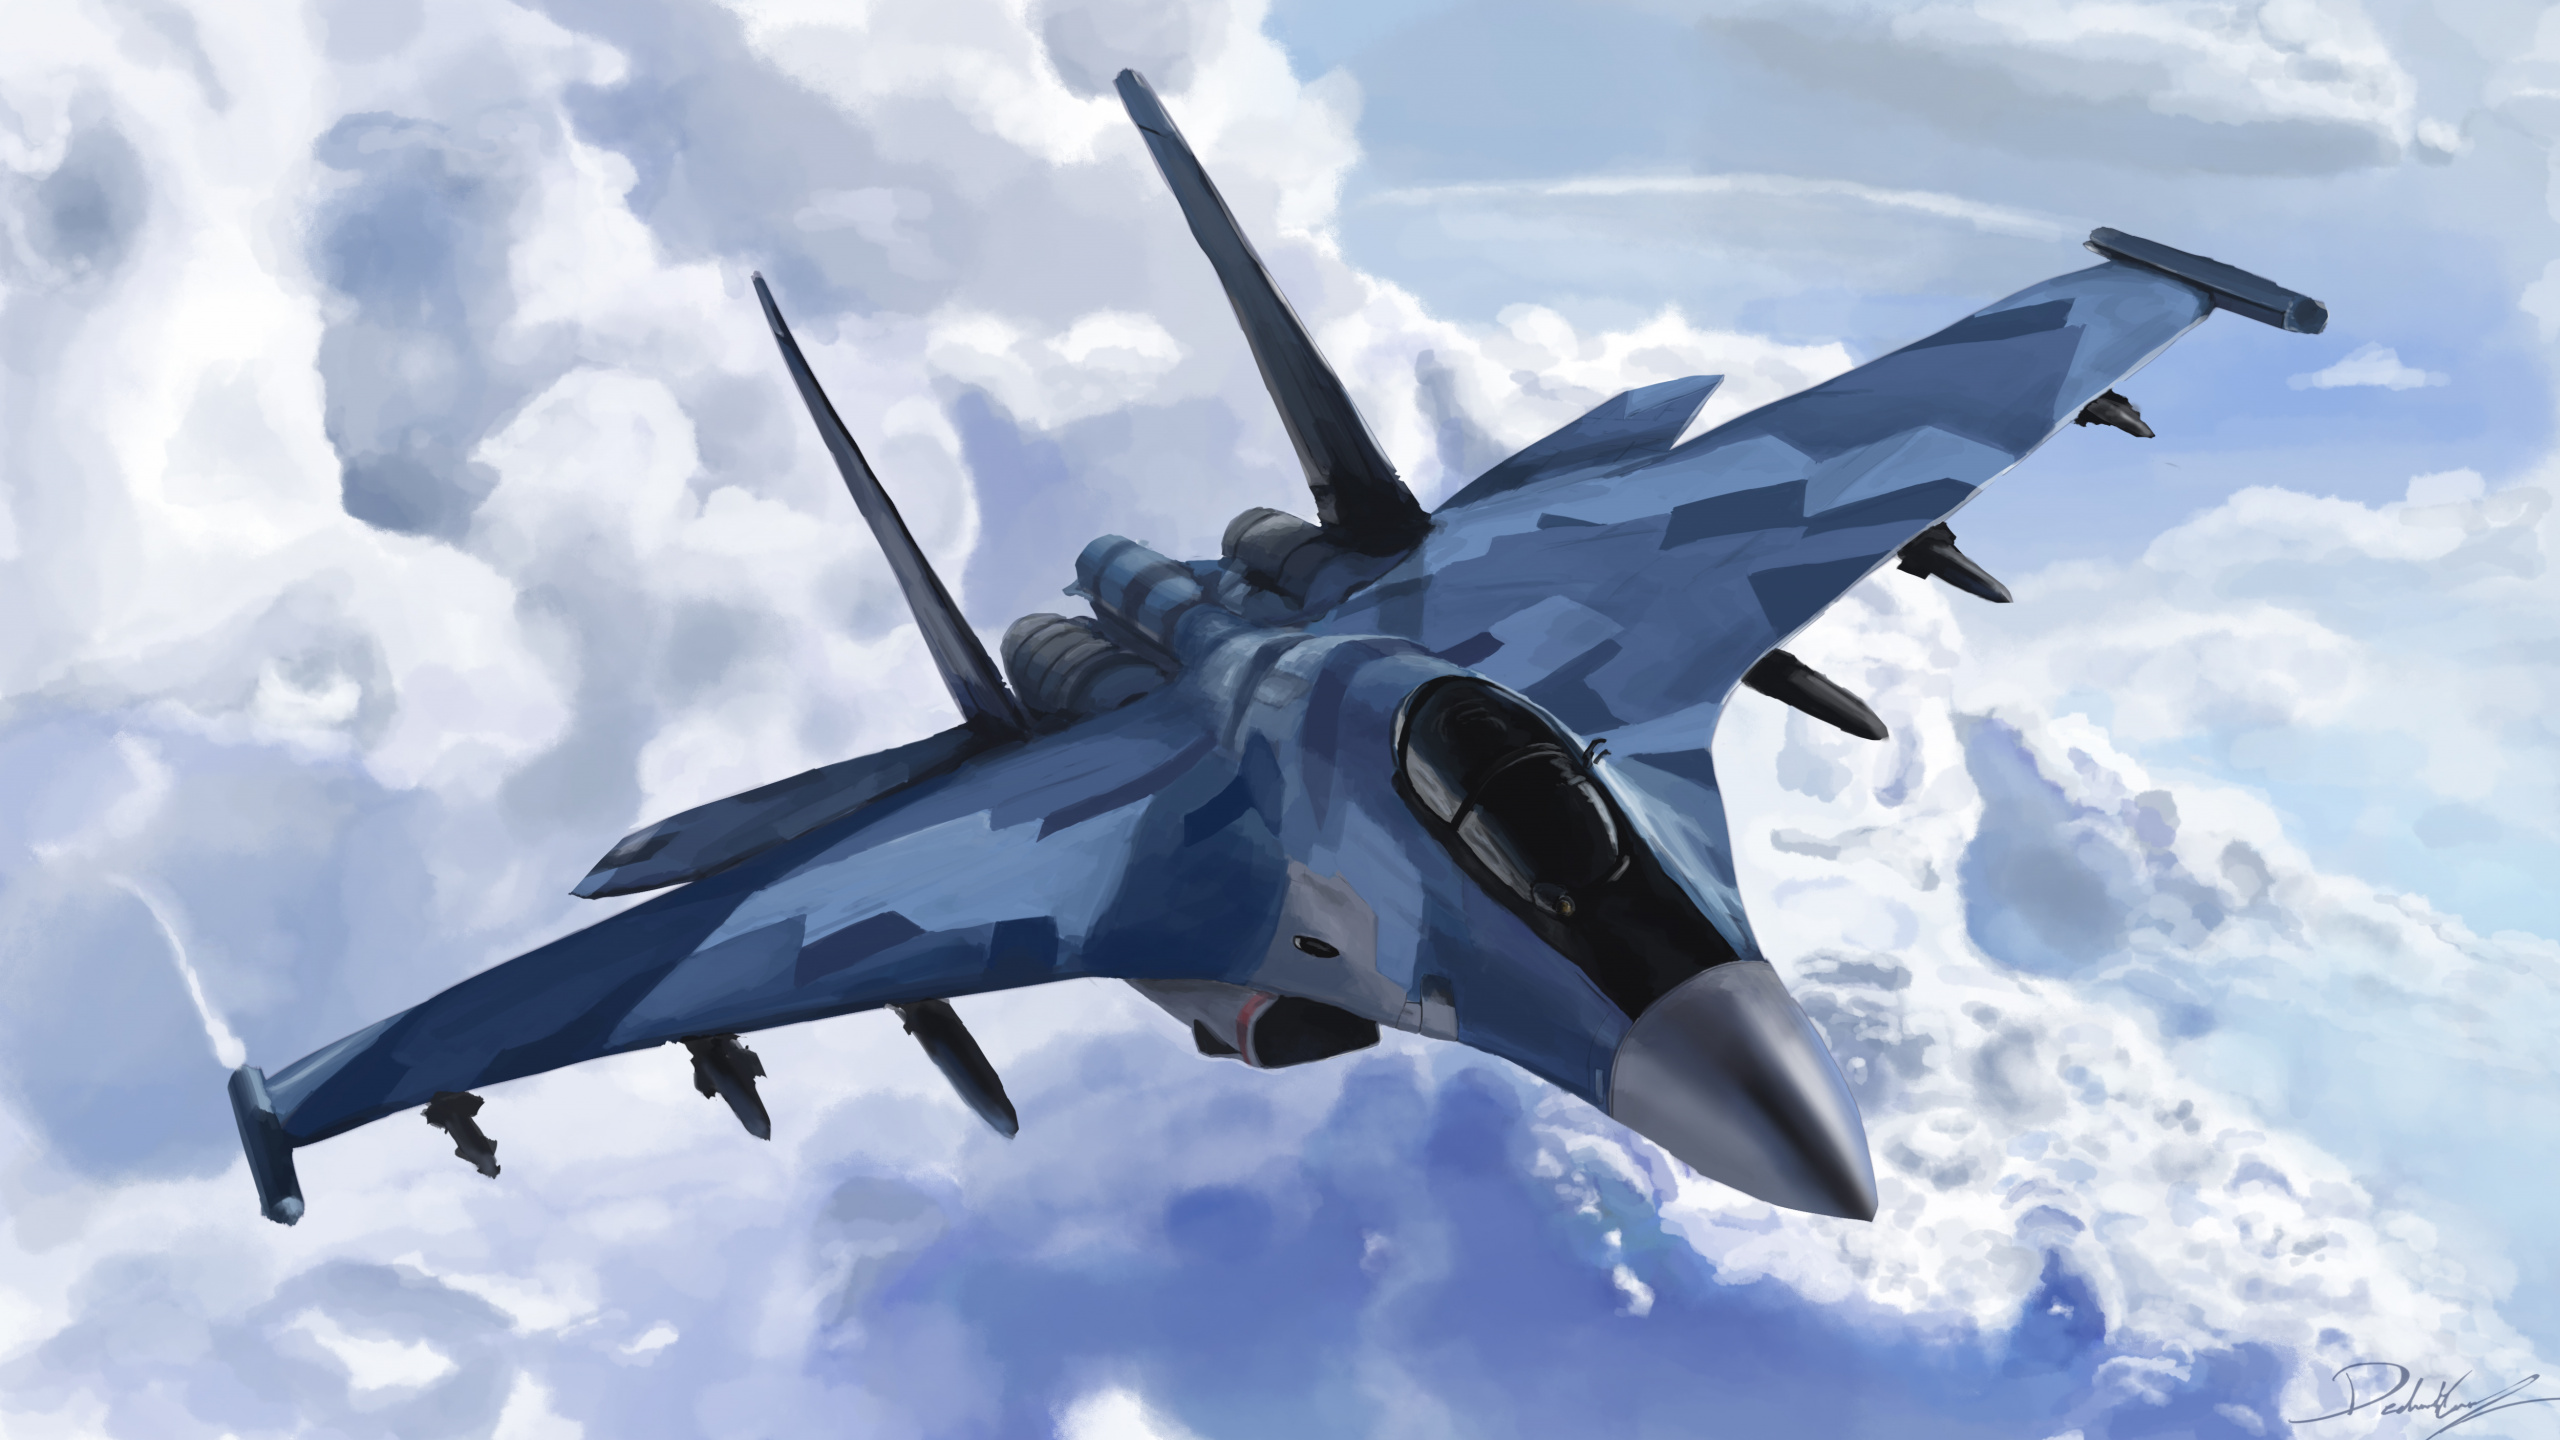 Gray Fighter Jet Flying in The Sky. Wallpaper in 2560x1440 Resolution